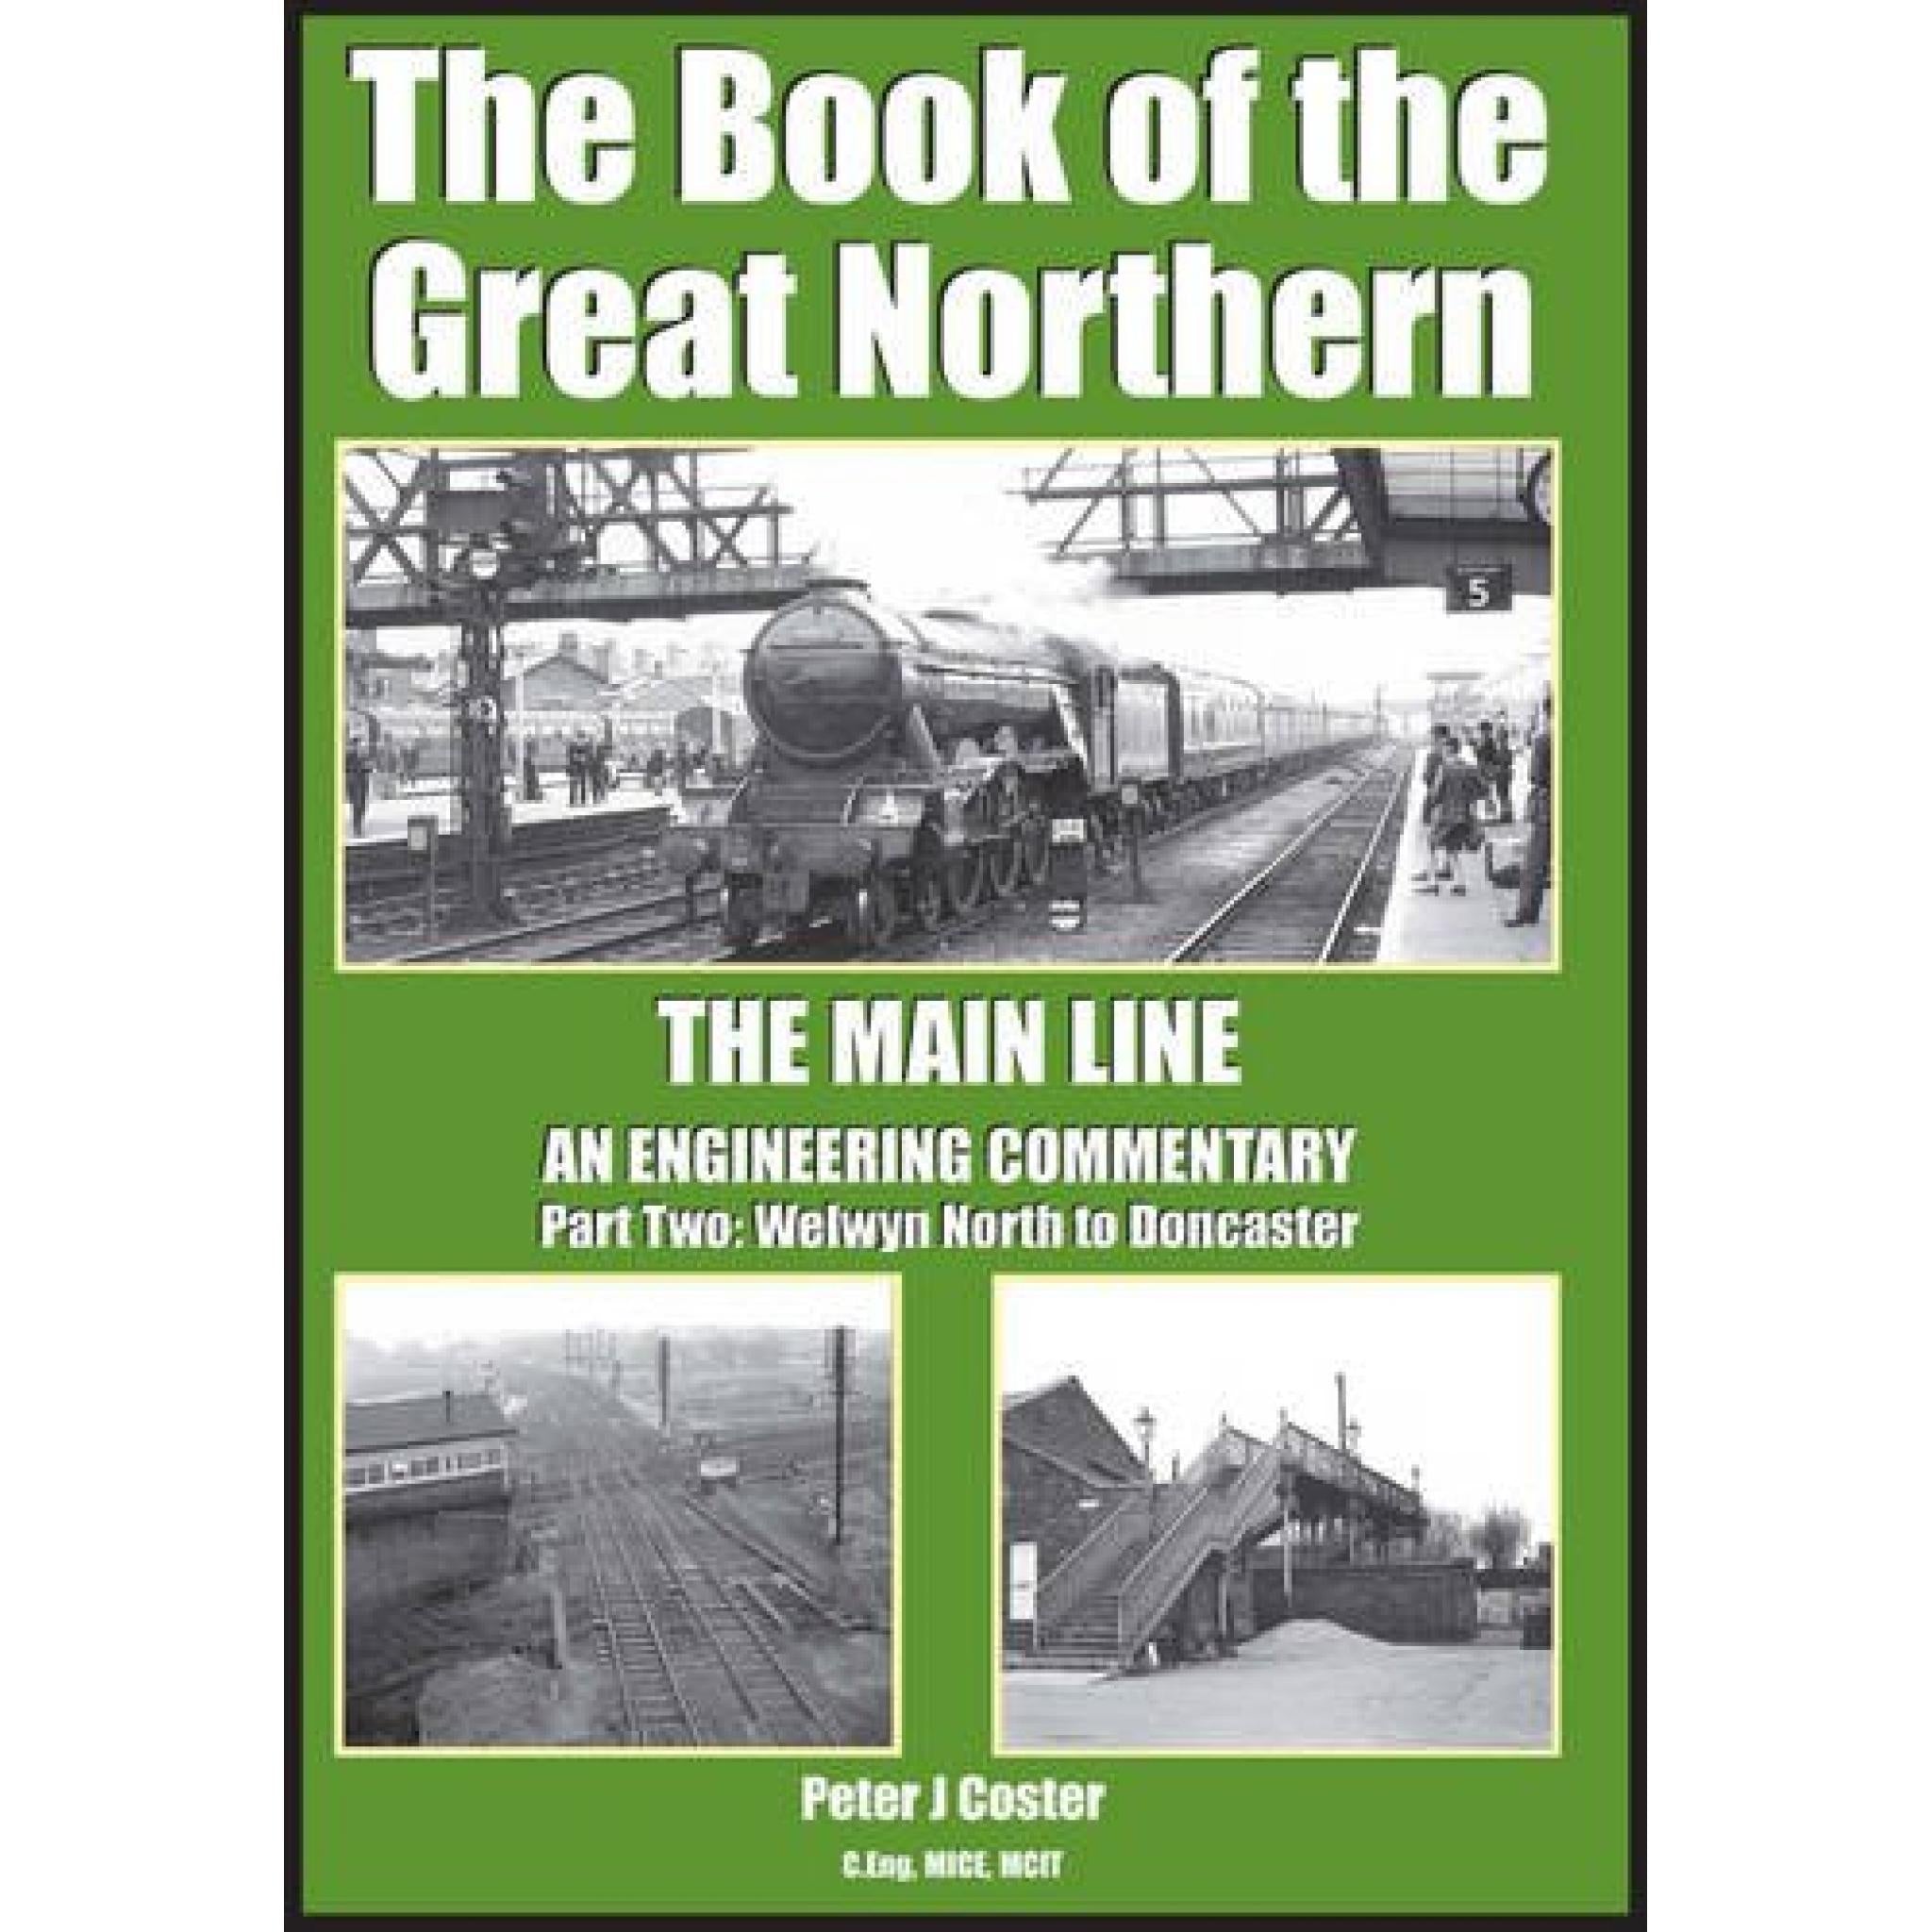 50%+ OFF RRP is £26.95   The Book of the Great Northern - The Main Line - Part Two - Welwyn North to Doncaster